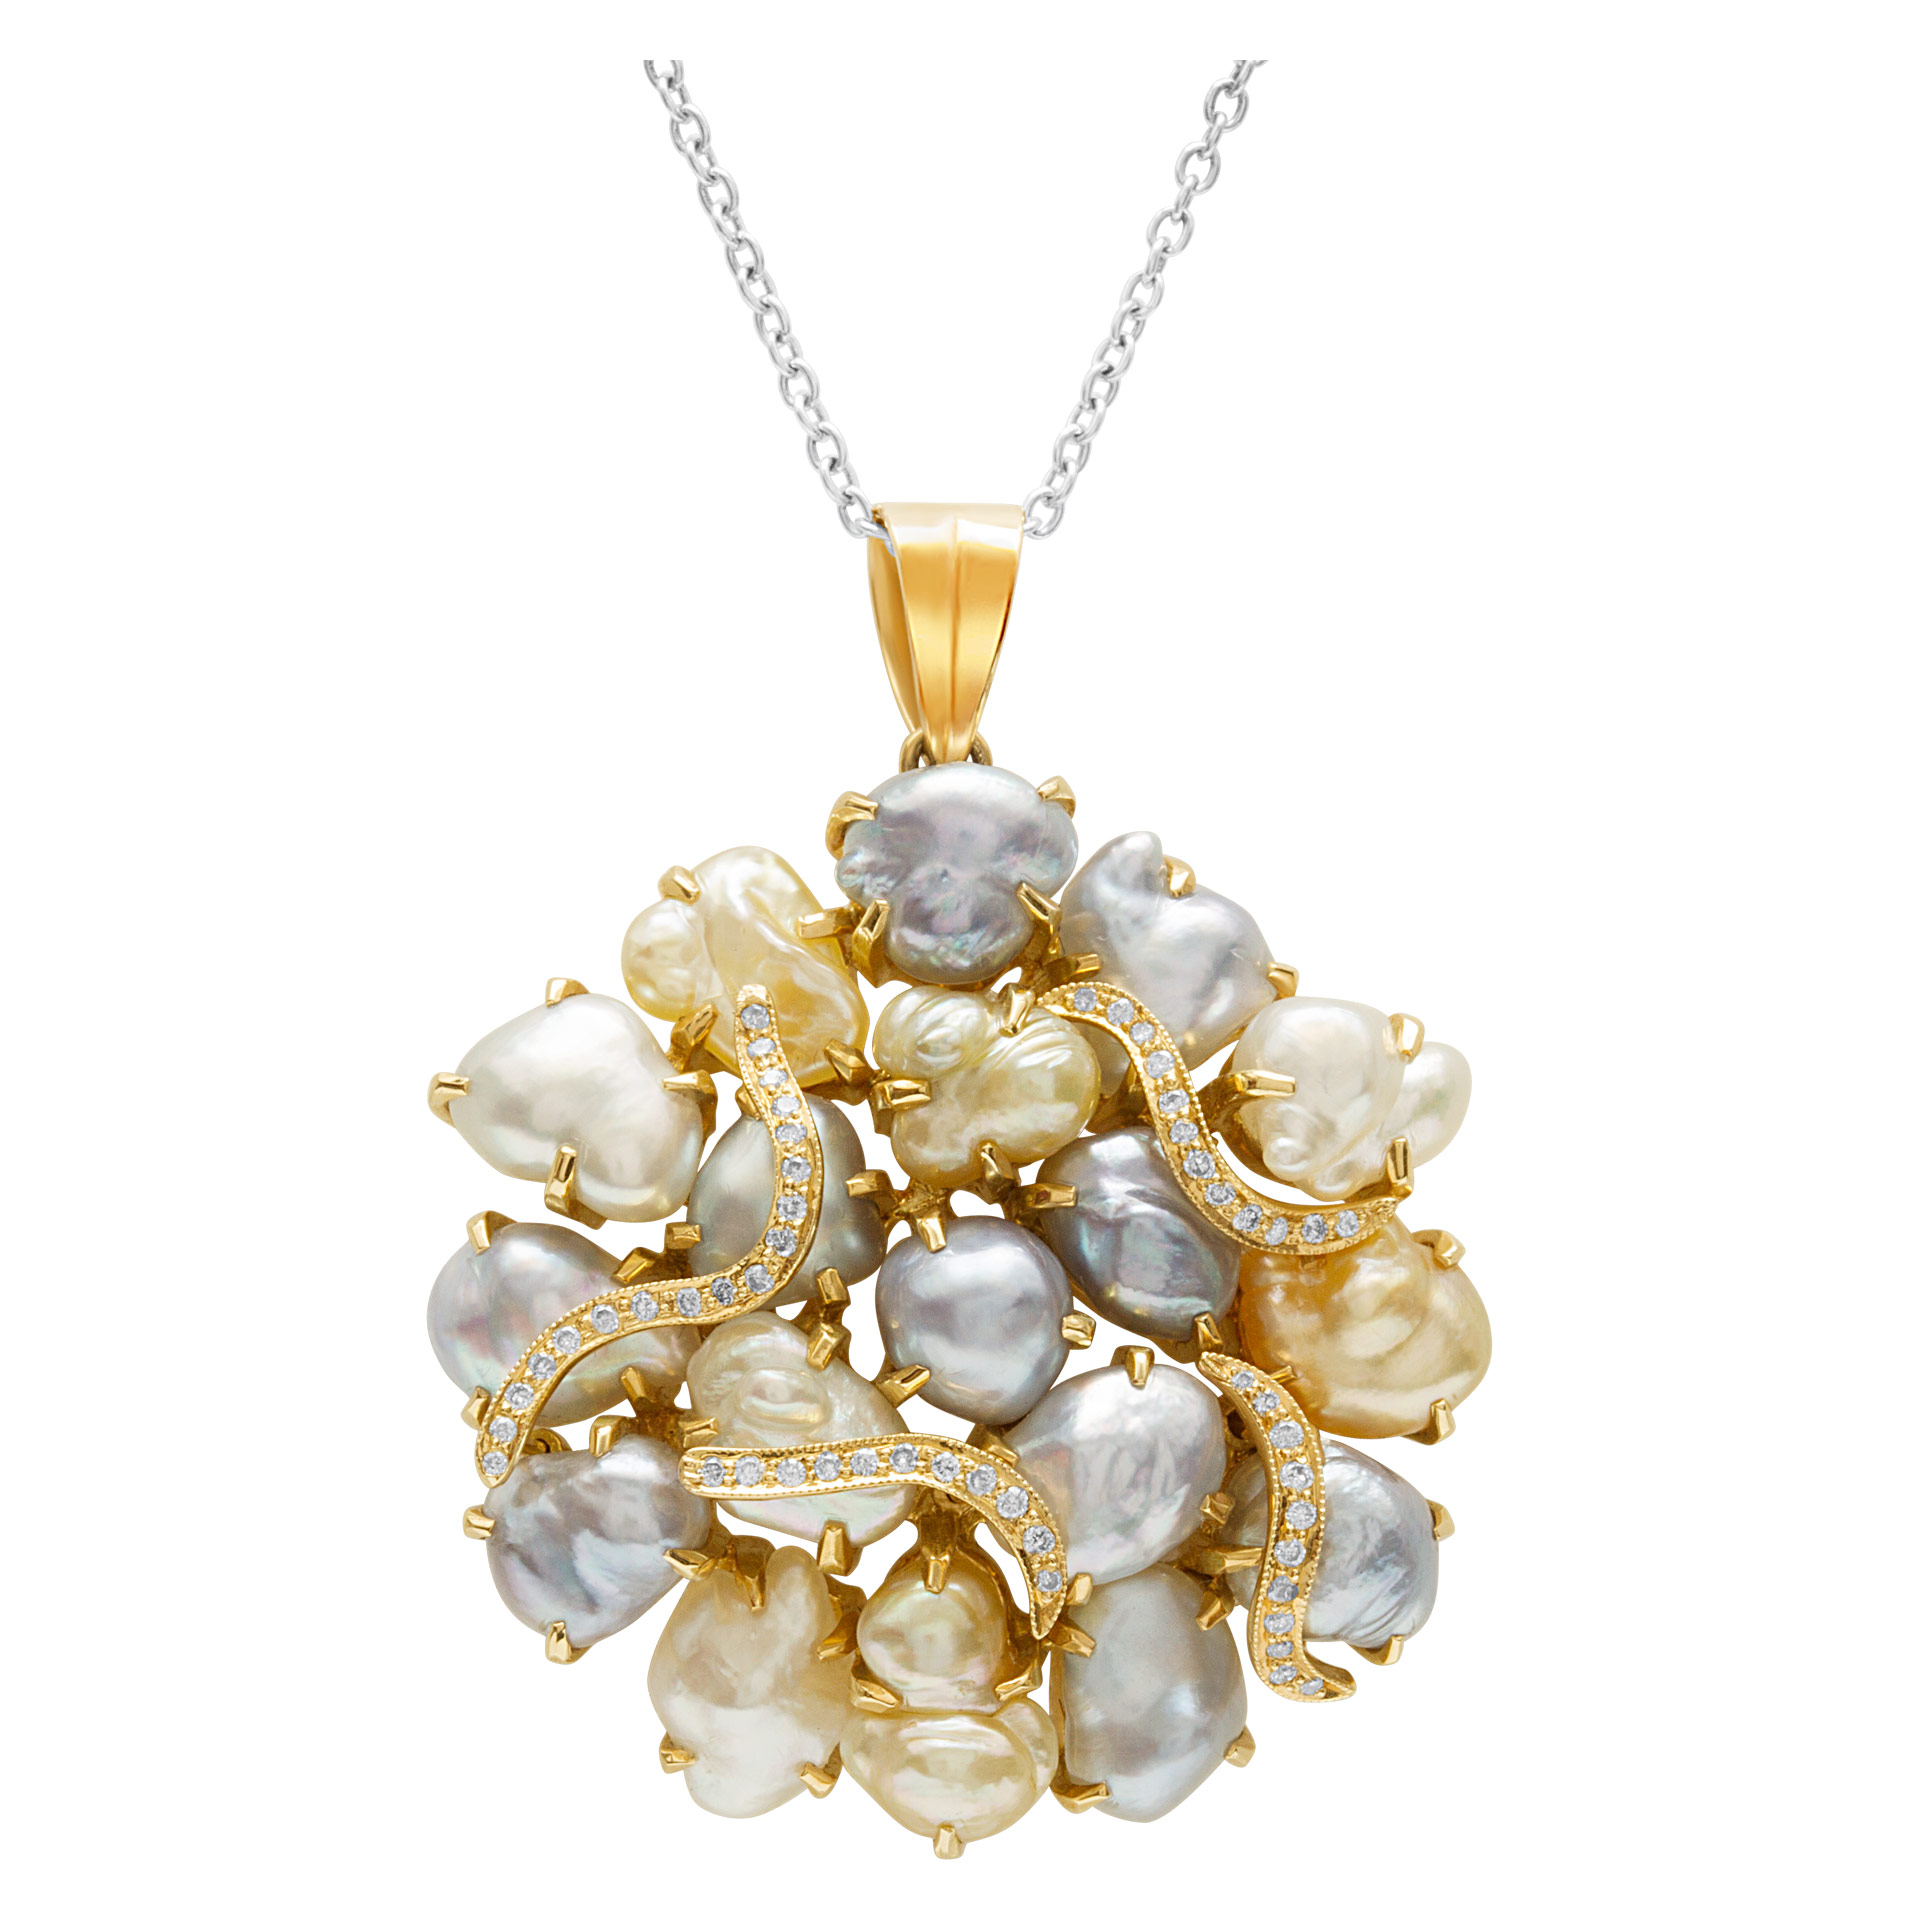 Pearl pendant with 0.95 cts in diamond accents image 1